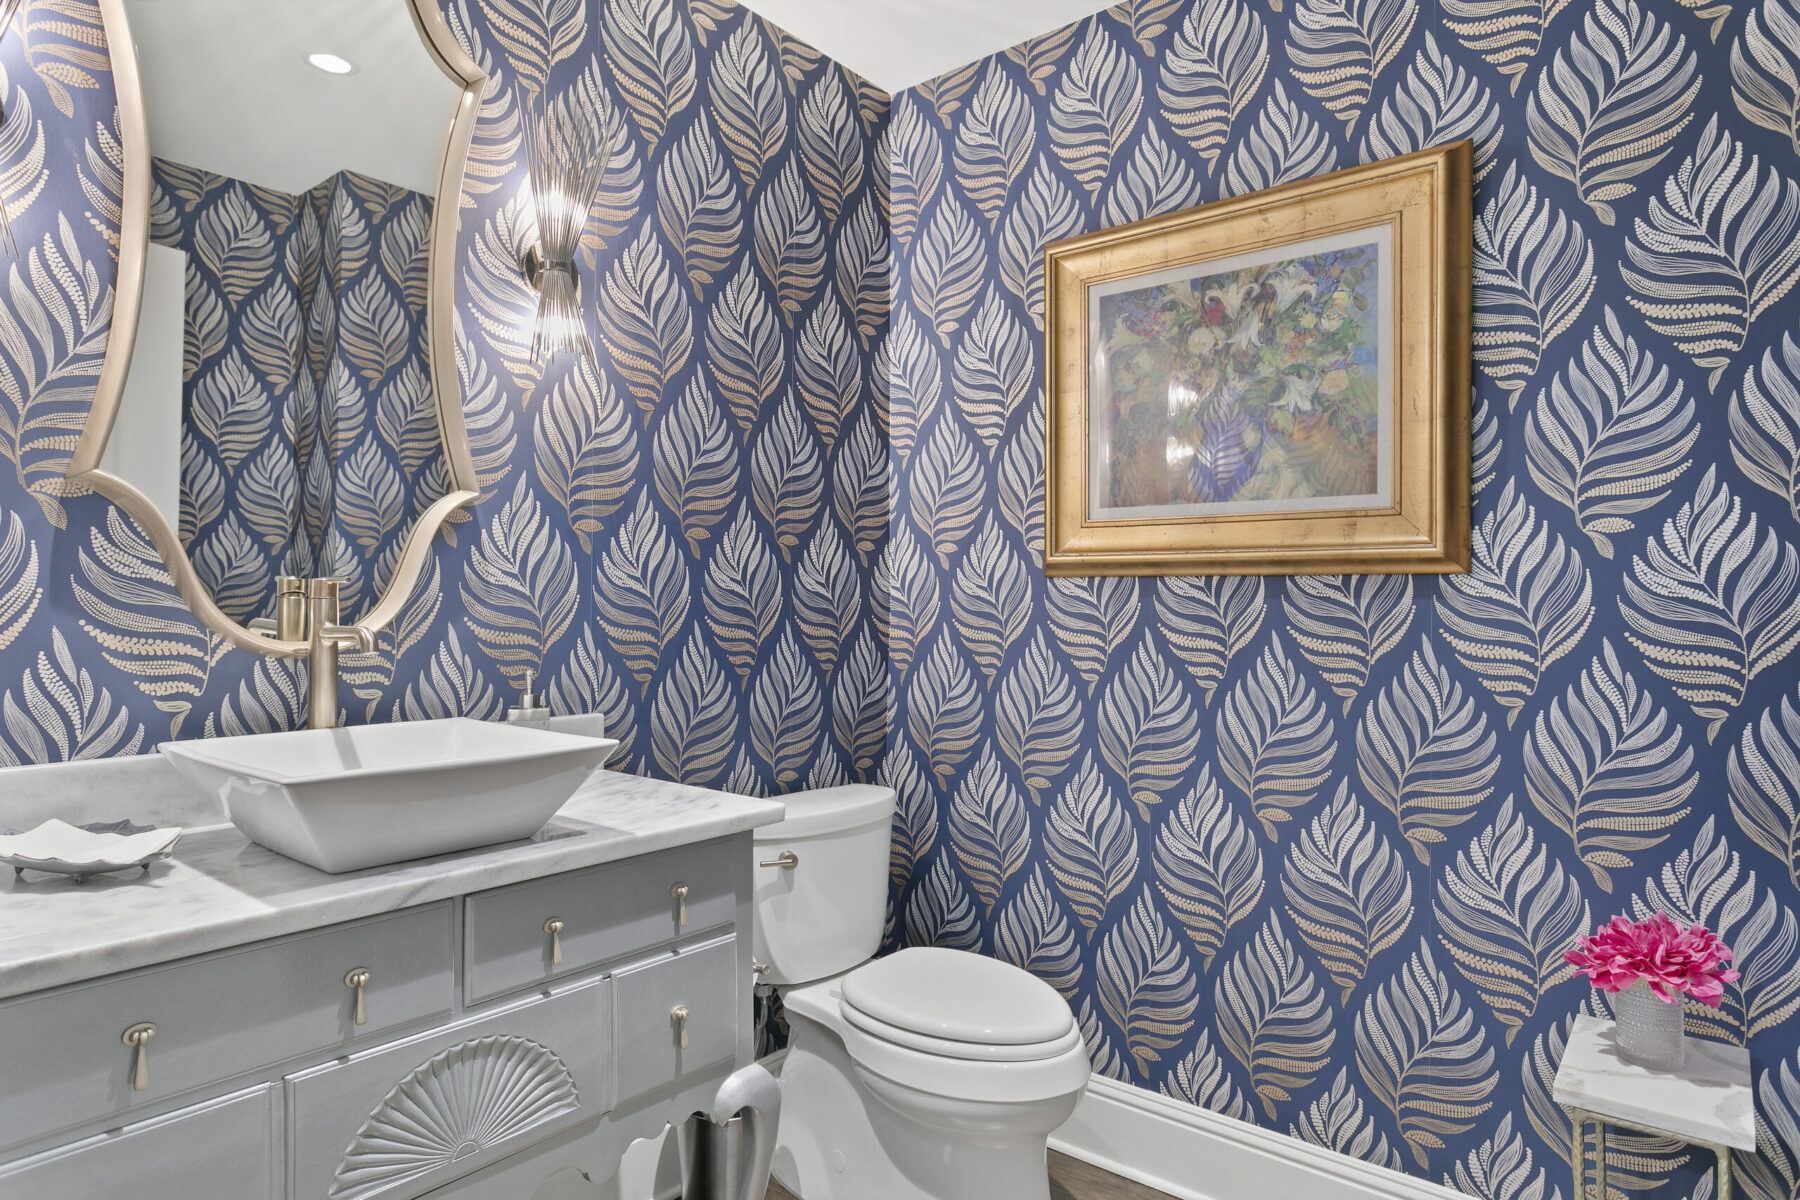 Powder room interiors with patterned wallpapers designed by Tampa's best interior design studio Home Frosting